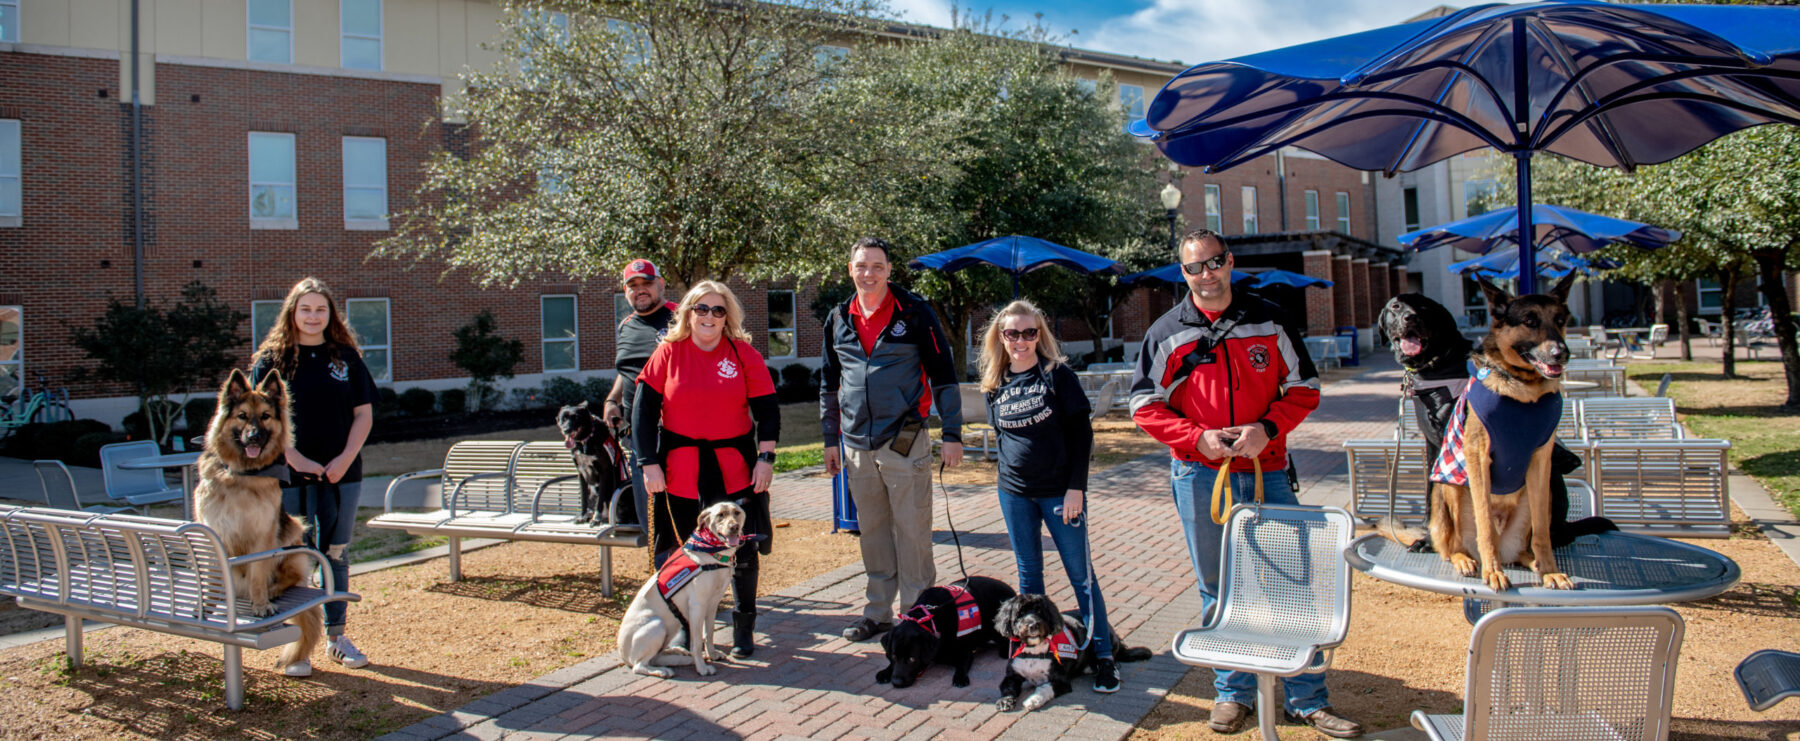 Members of the Go Team therapy dog group visited the A&M-Commerce campus last month